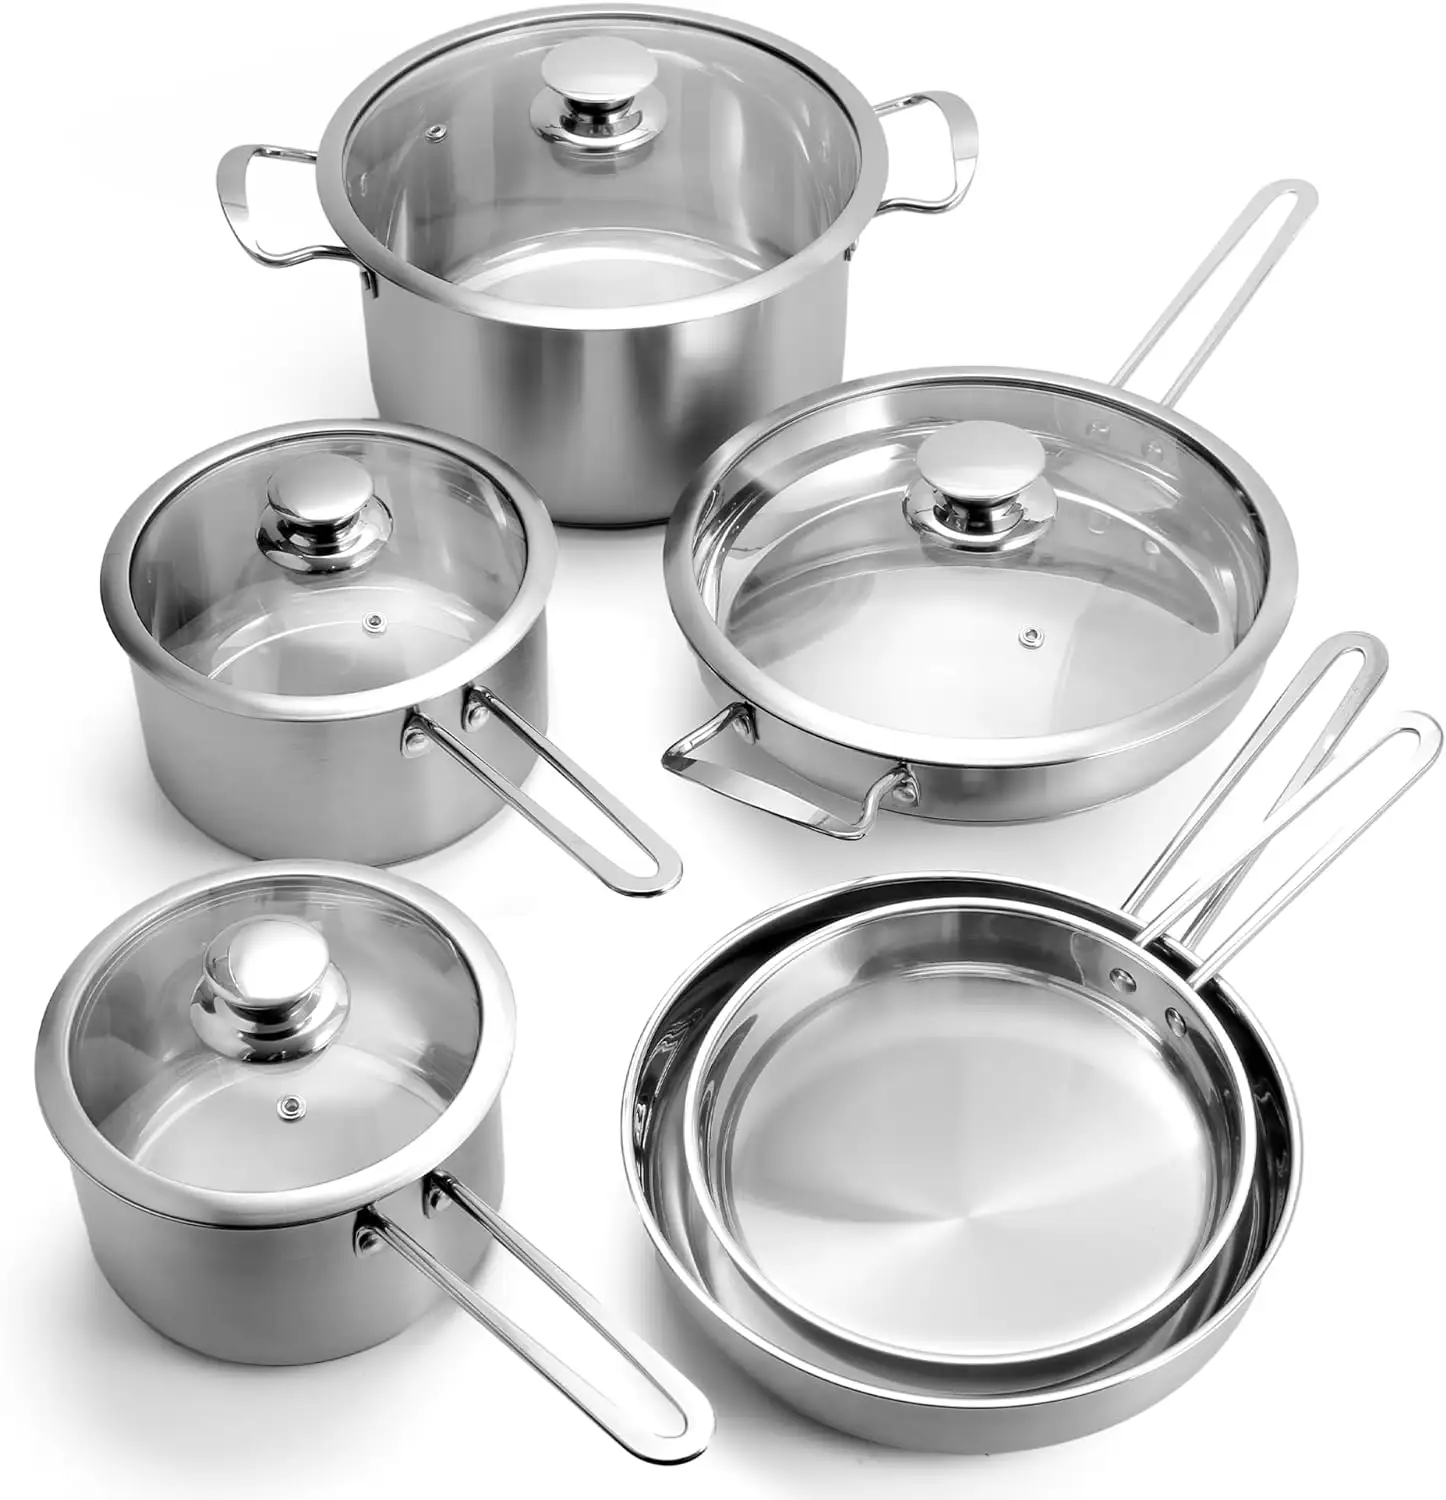 10PCS stainless steel Pots and Pans Set with handle Kitchen Cookware Induction Pots Sets with Glass Lids with All Stovetops